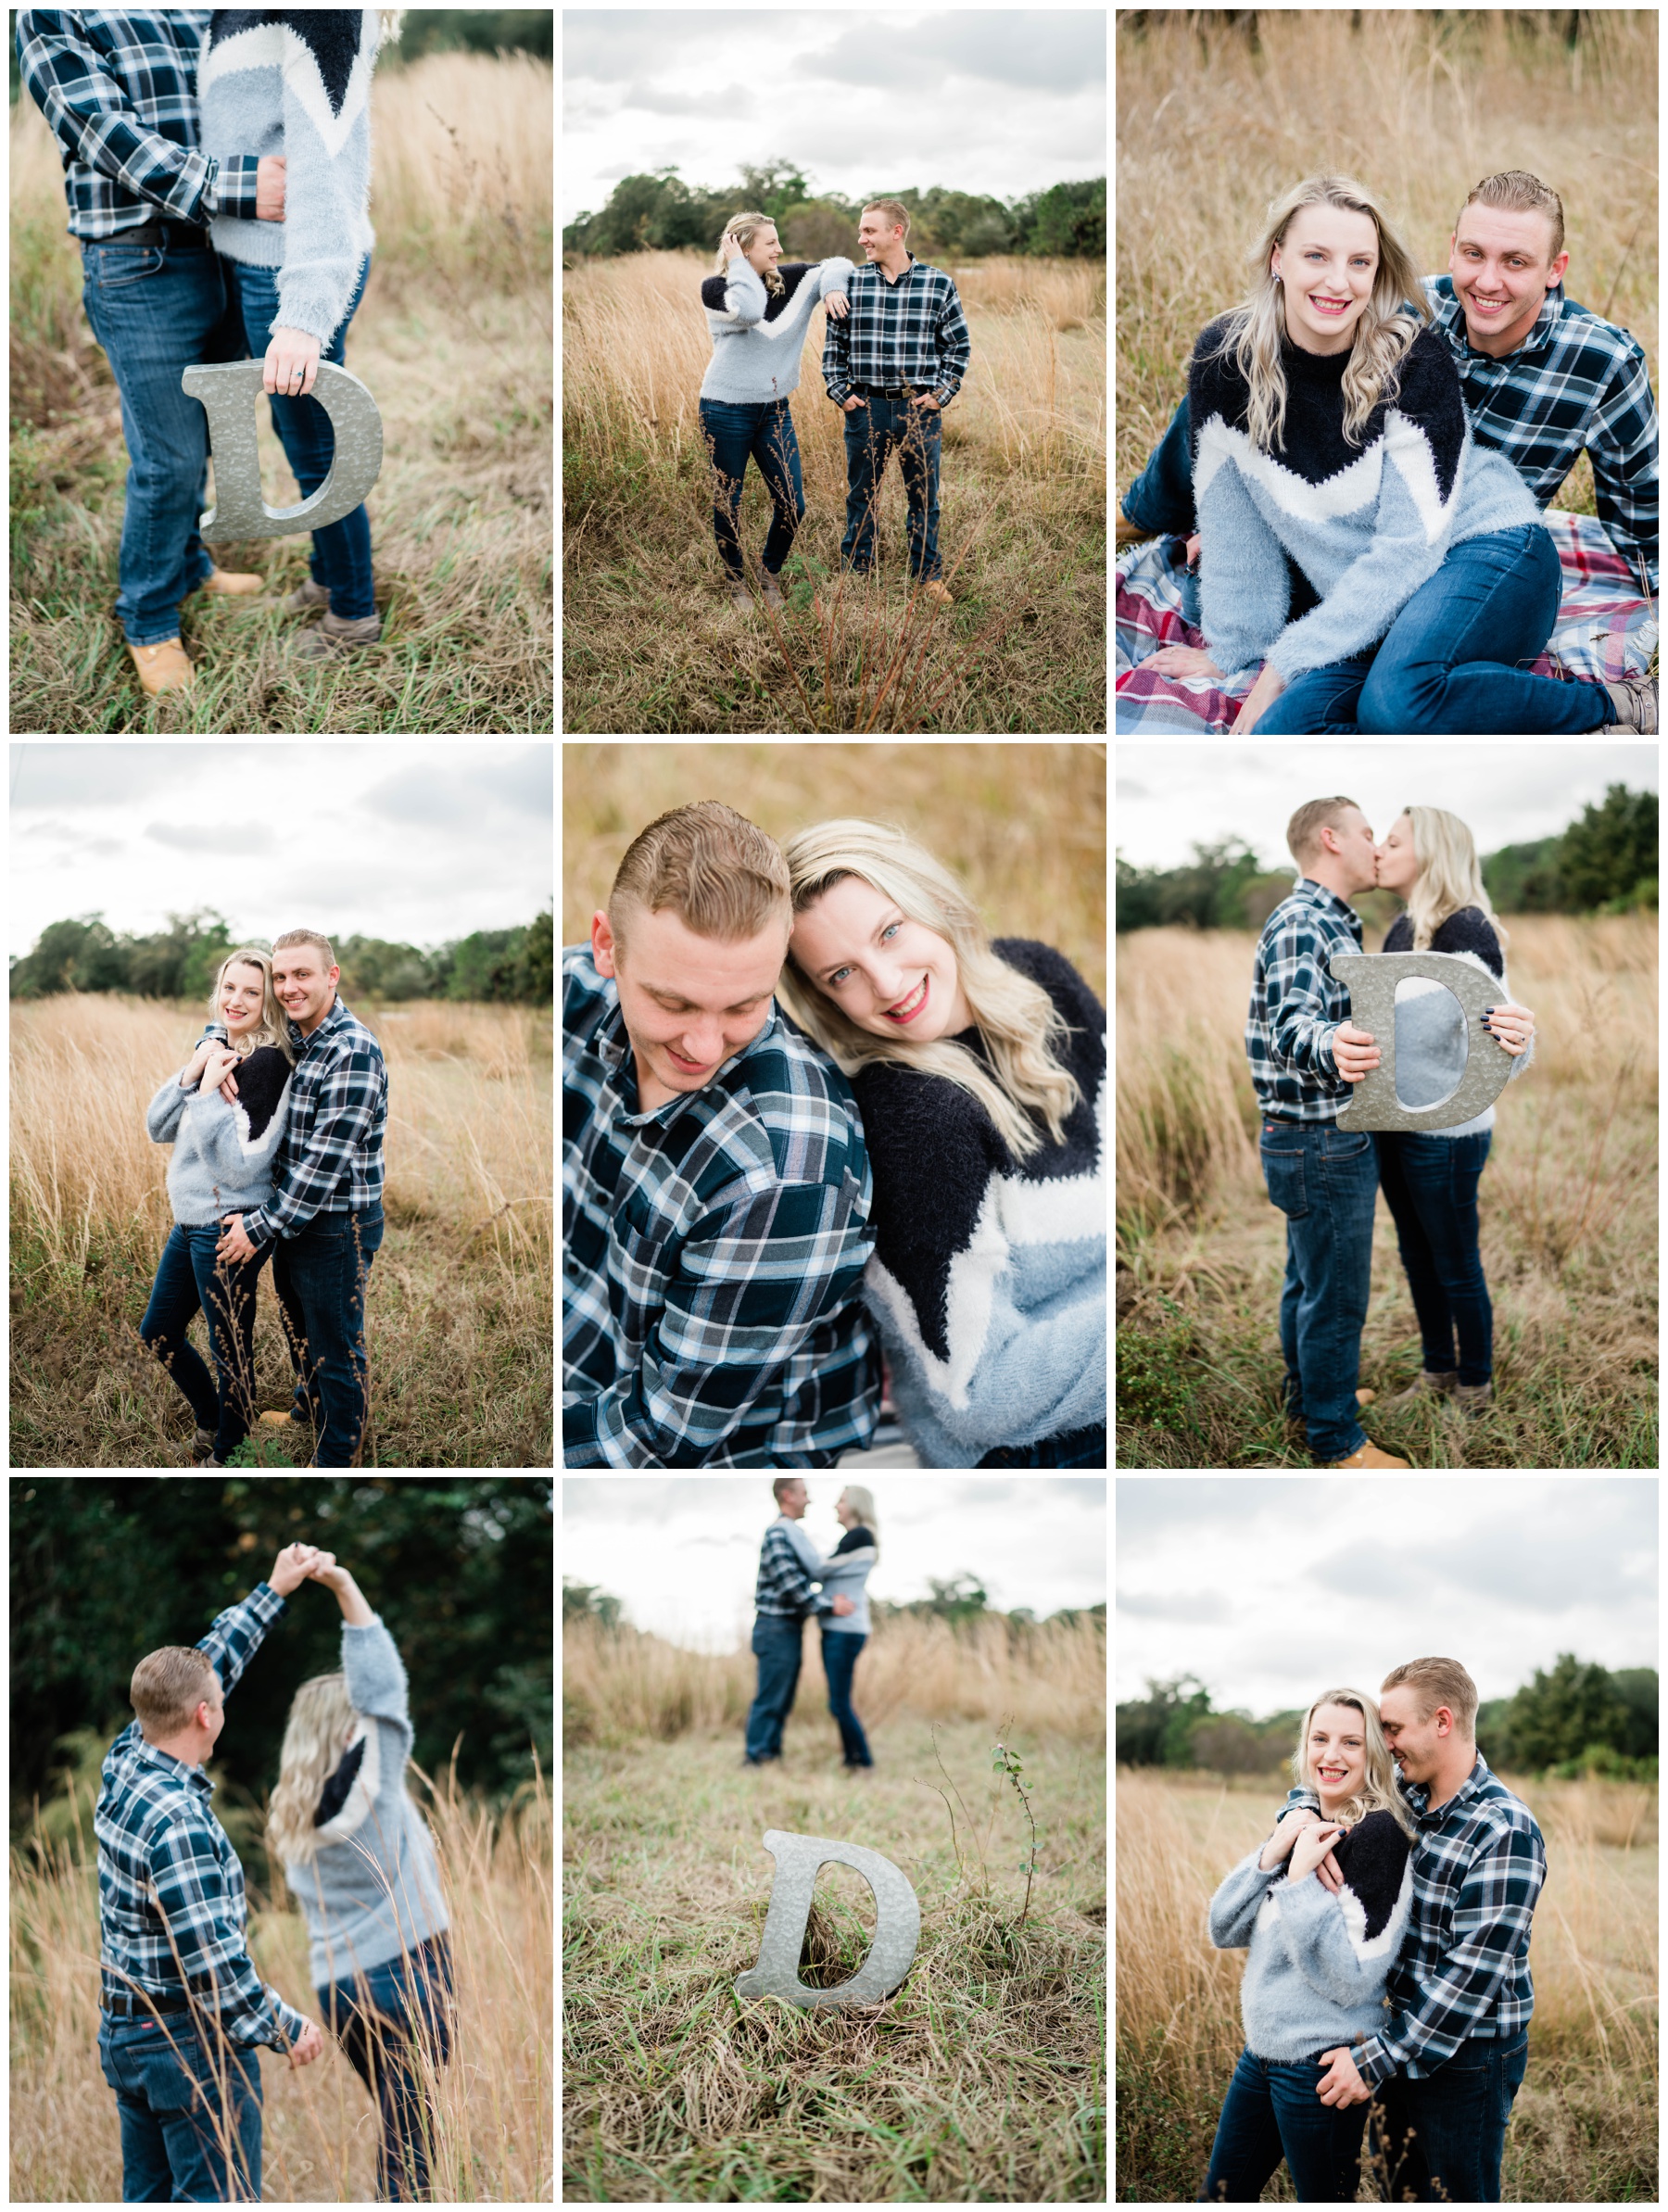 Engaged couple embraces and dances at Southwest Florida meadow during photo shoot. 